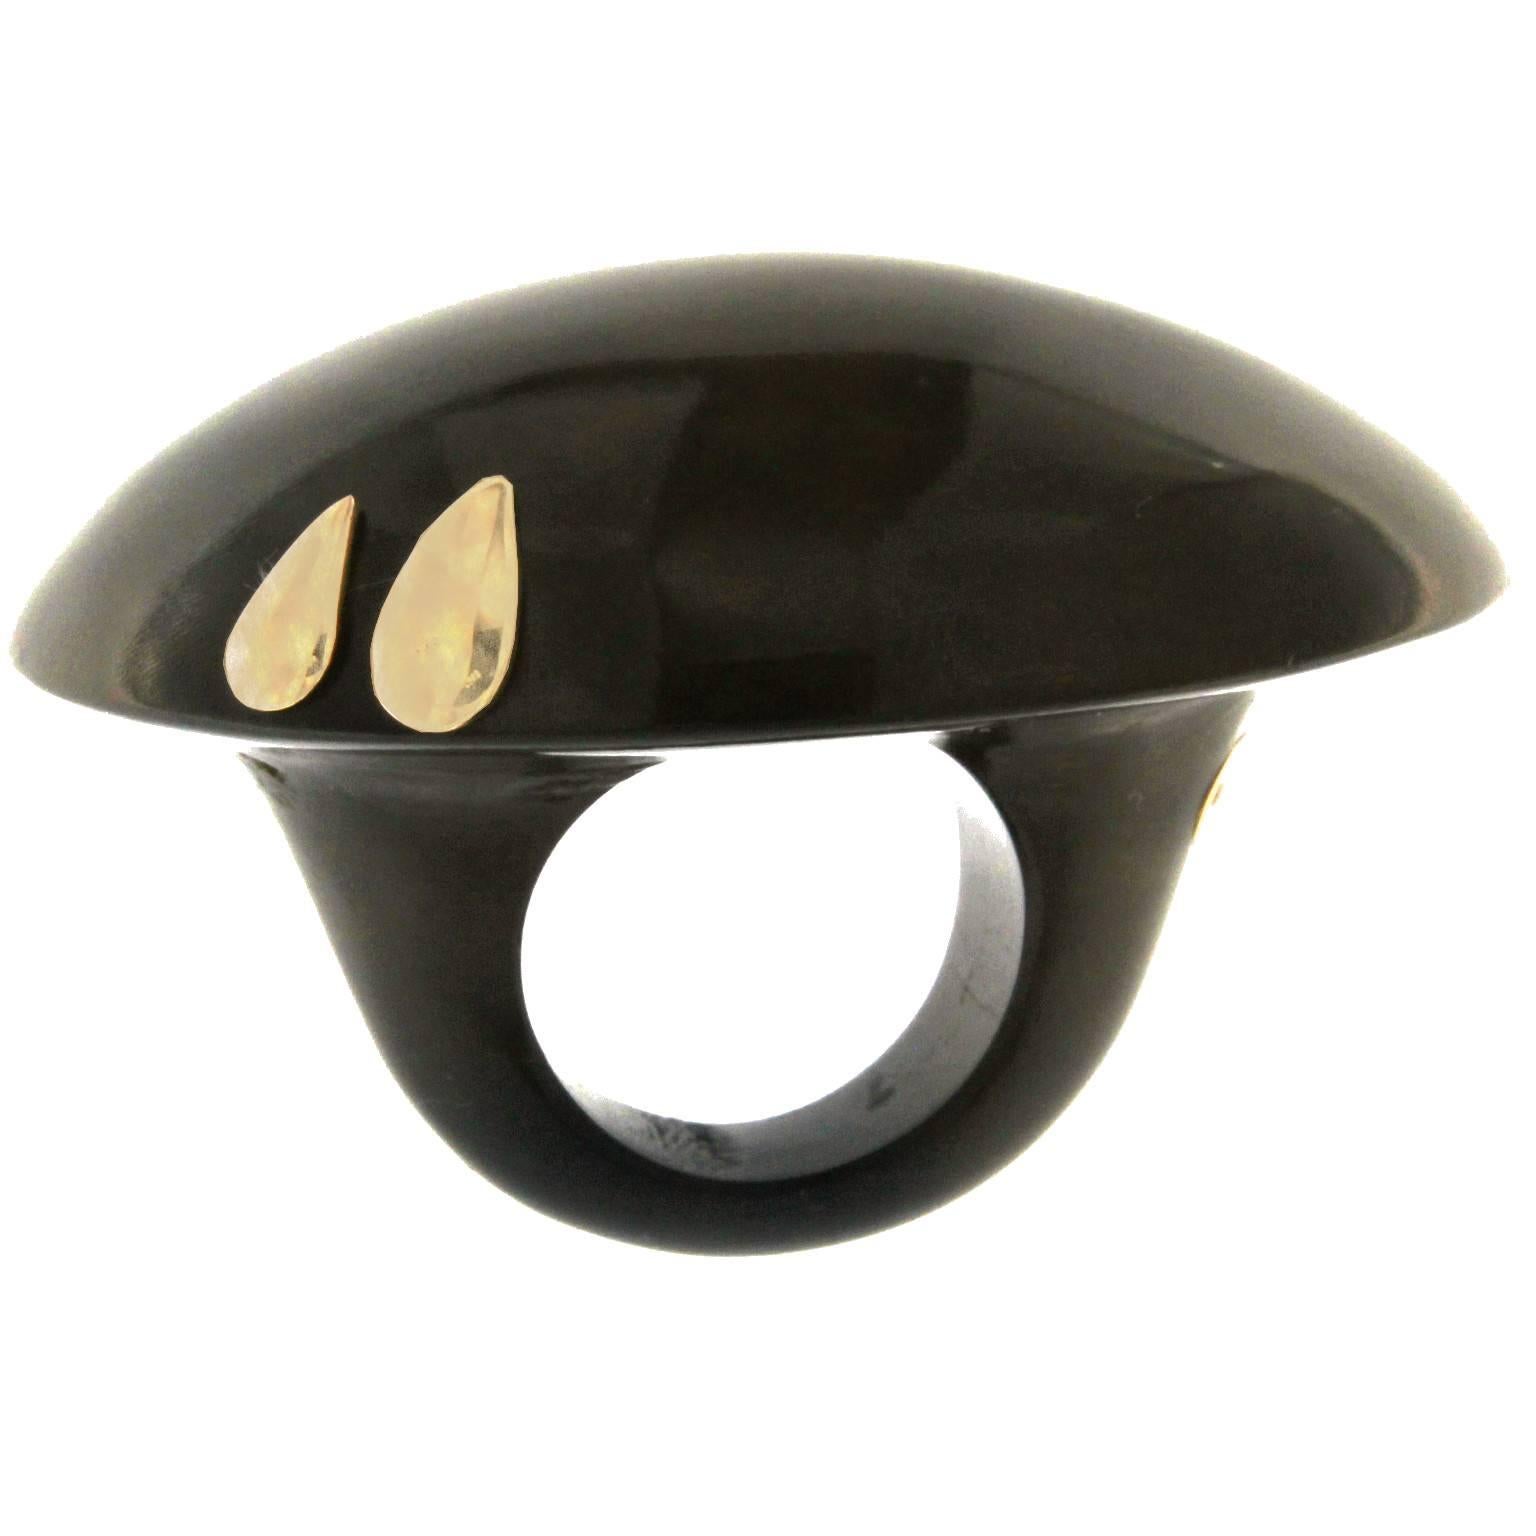 Bufalo horn ring in 18 kt yellow gold 

the total weight of the gold is 1.00

us size 7
STAMP: 10 MI ITALY 750

